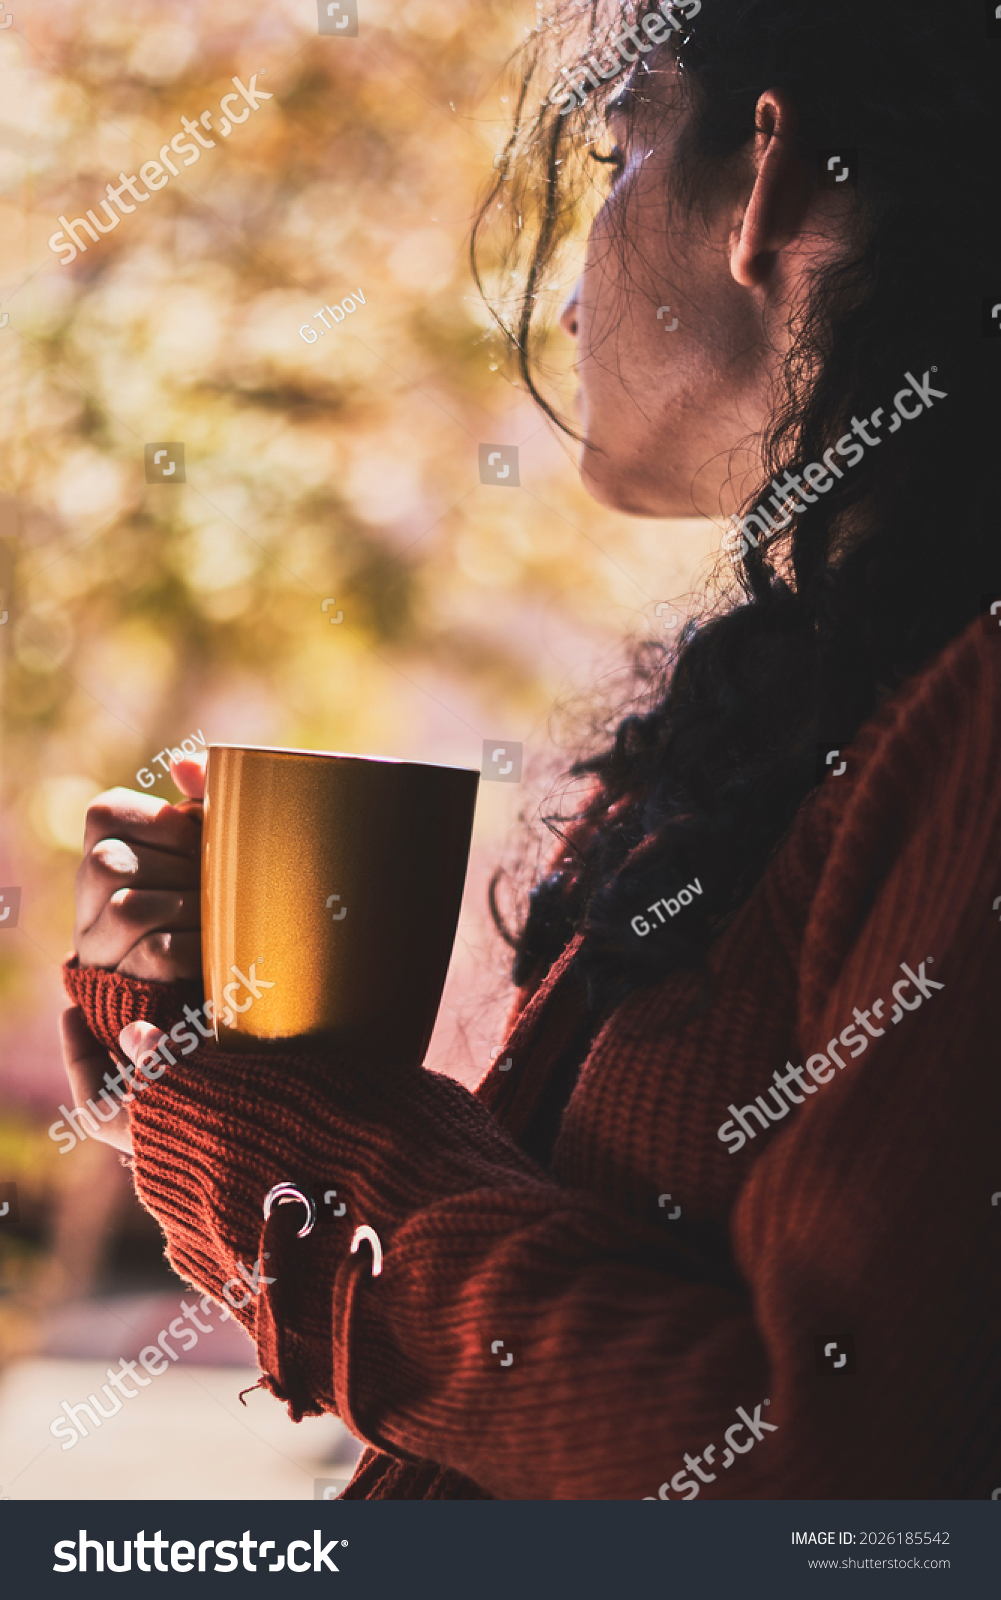 Cold autumn days - a young multi-racial female drinks coffee in a cozy windowsill. Middle-eastern or mixed-race woman enjoys weekend drinking hot tea near the windows #2026185542